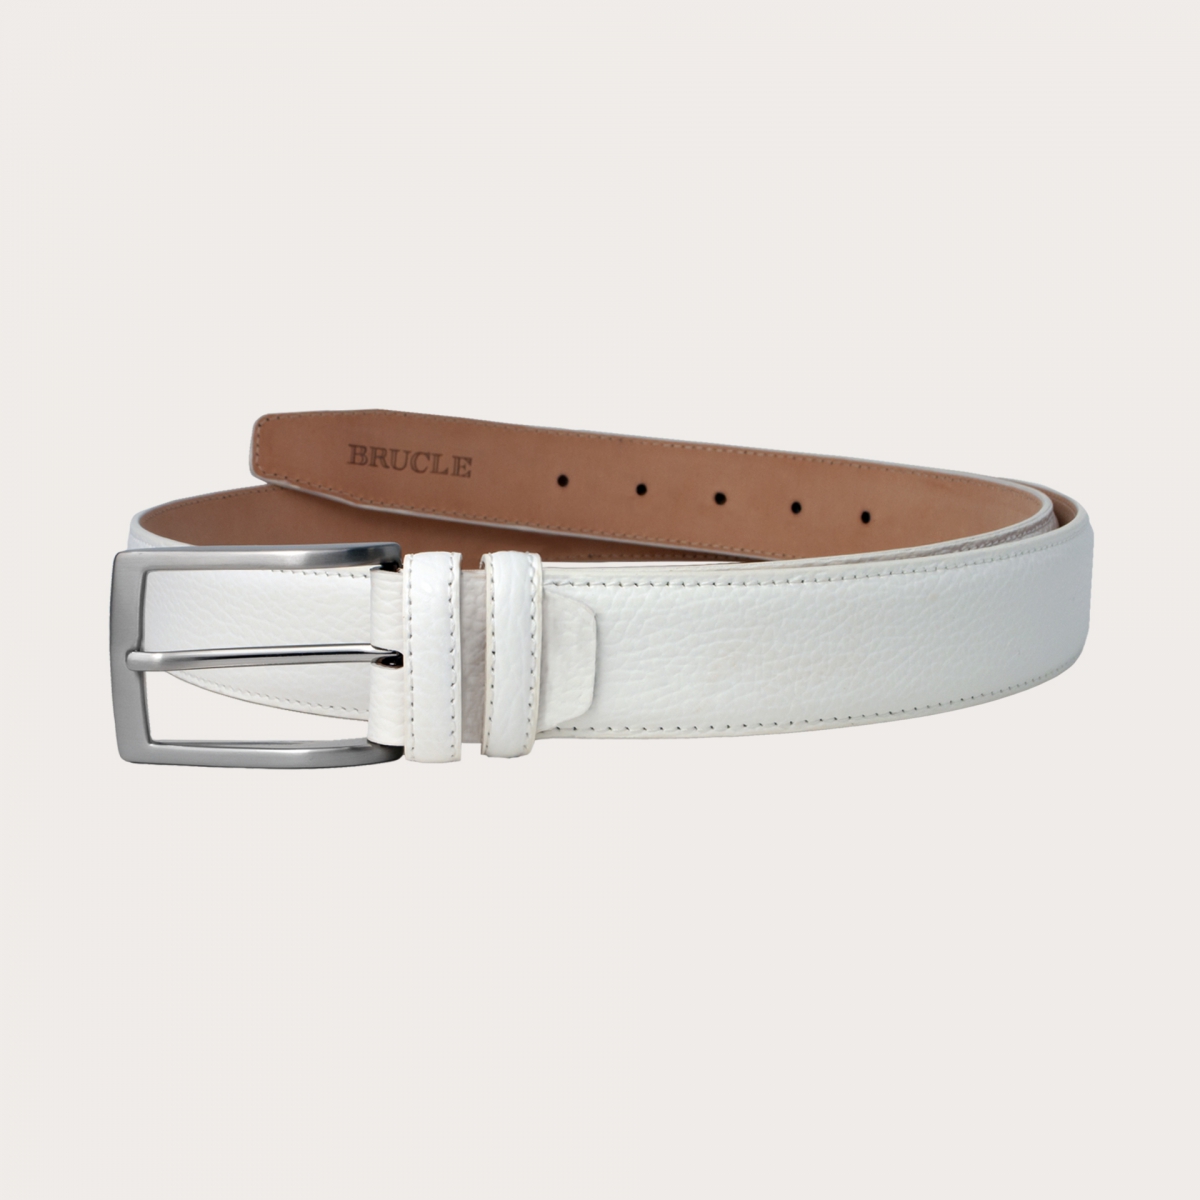 Elegant casual belt in white leather